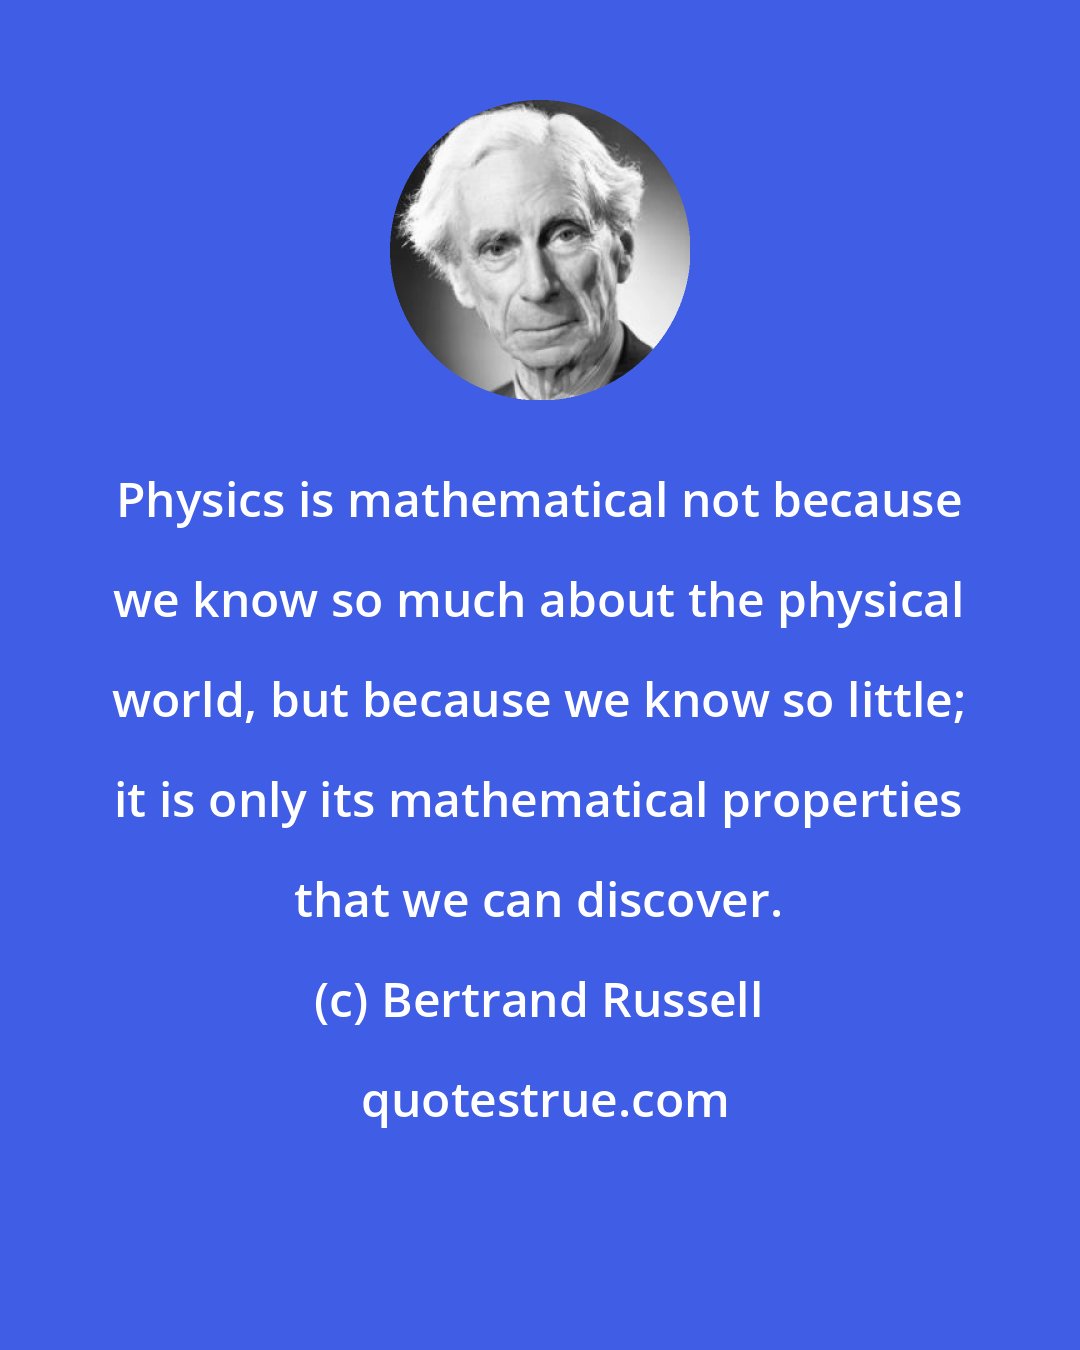 Bertrand Russell: Physics is mathematical not because we know so much about the physical world, but because we know so little; it is only its mathematical properties that we can discover.